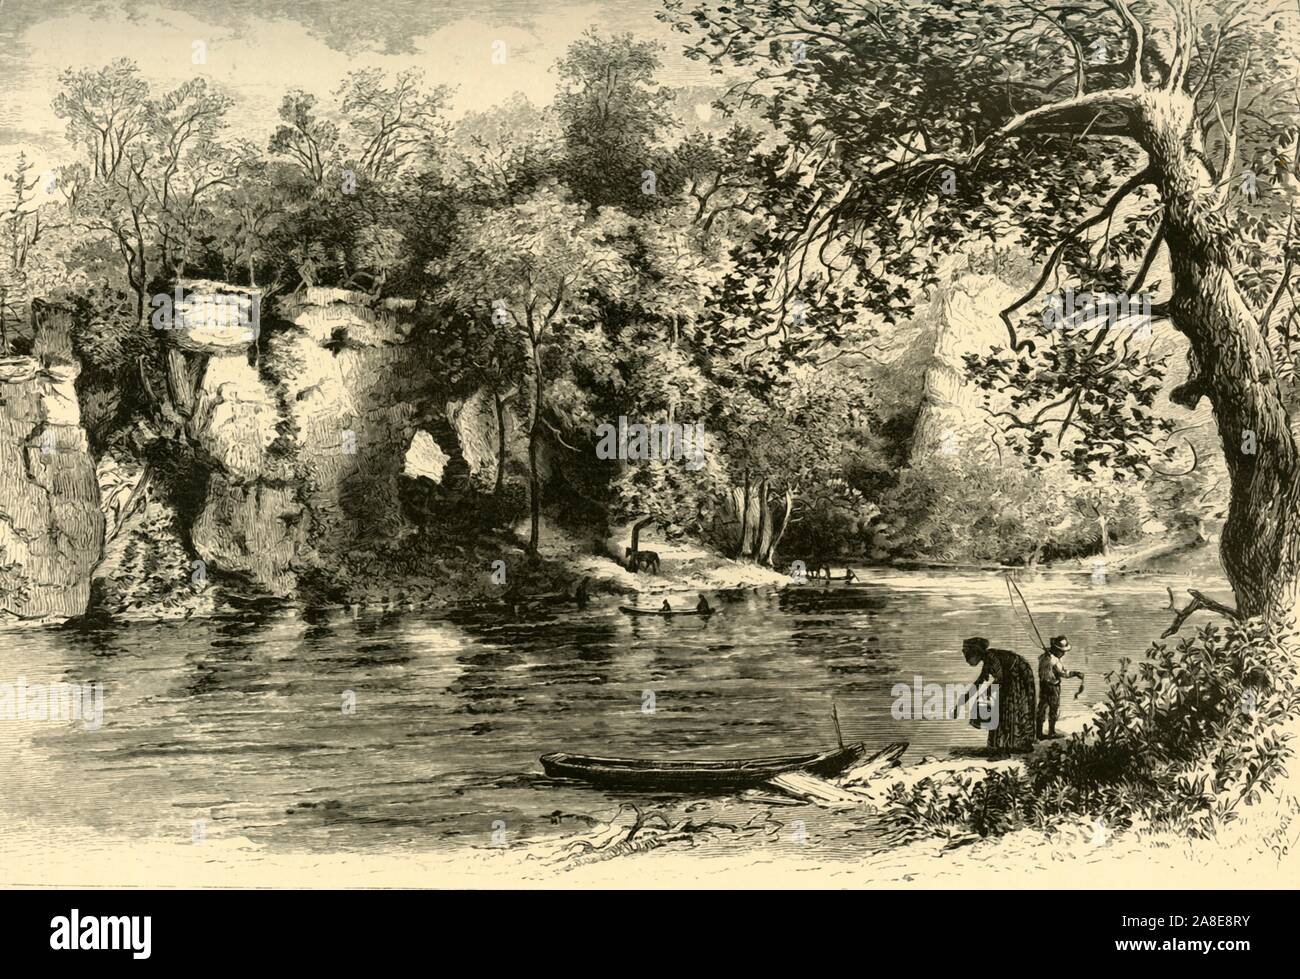 'New River at Eggleston's Springs', 1872. Peaceful scene in Virginia, USA. From &quot;Picturesque America; or, The Land We Live In, A Delineation by Pen and Pencil of the Mountains, Rivers, Lakes...with Illustrations on Steel and Wood by Eminent American Artists&quot; Vol. I, edited by William Cullen Bryant. [D. Appleton and Company, New York, 1872] Stock Photo